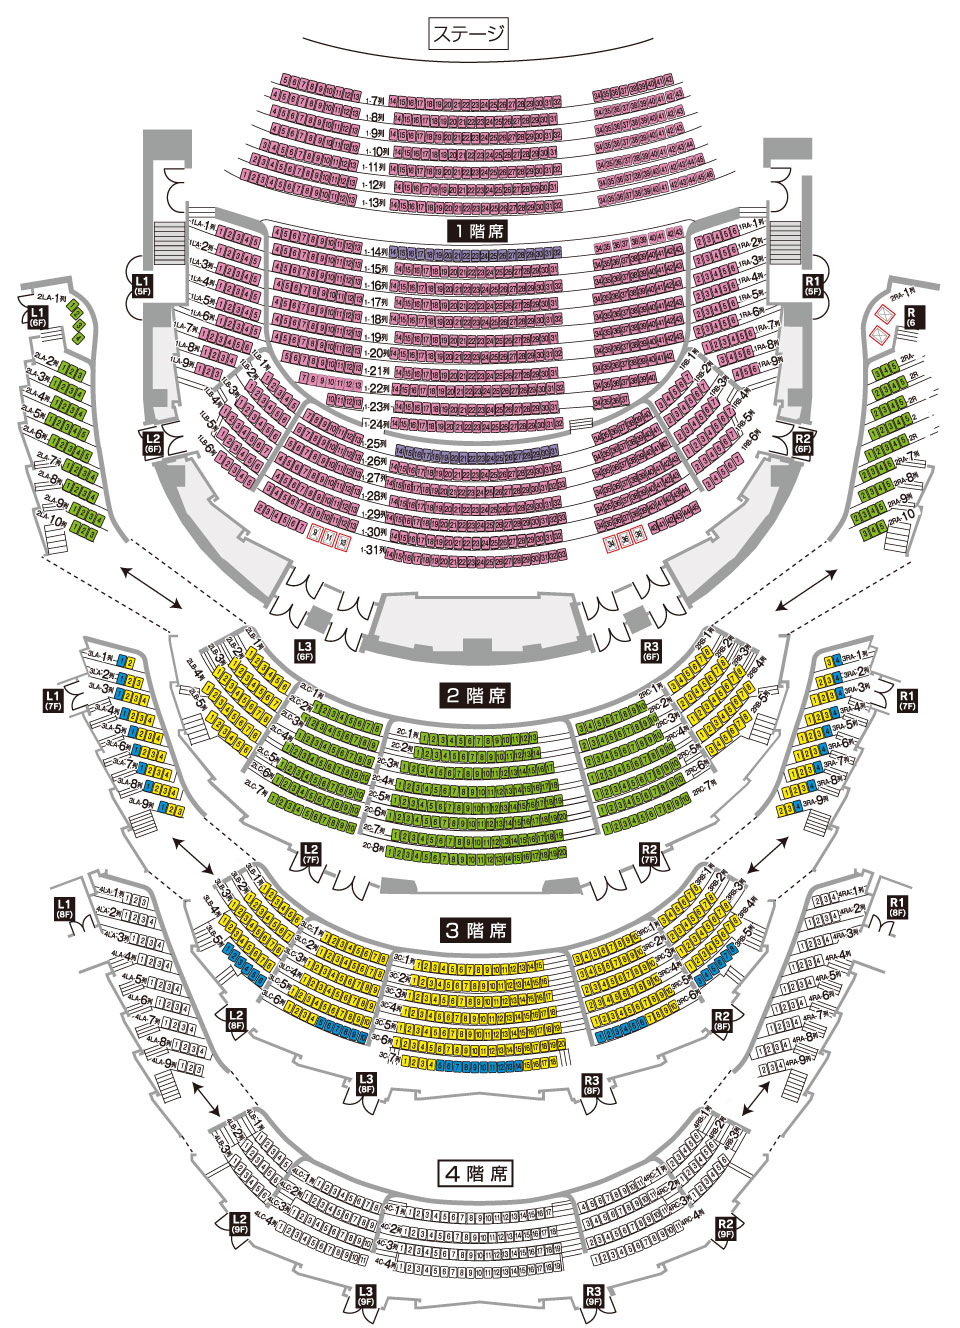 Seating Chart for the Subscription hitaru Concert Series